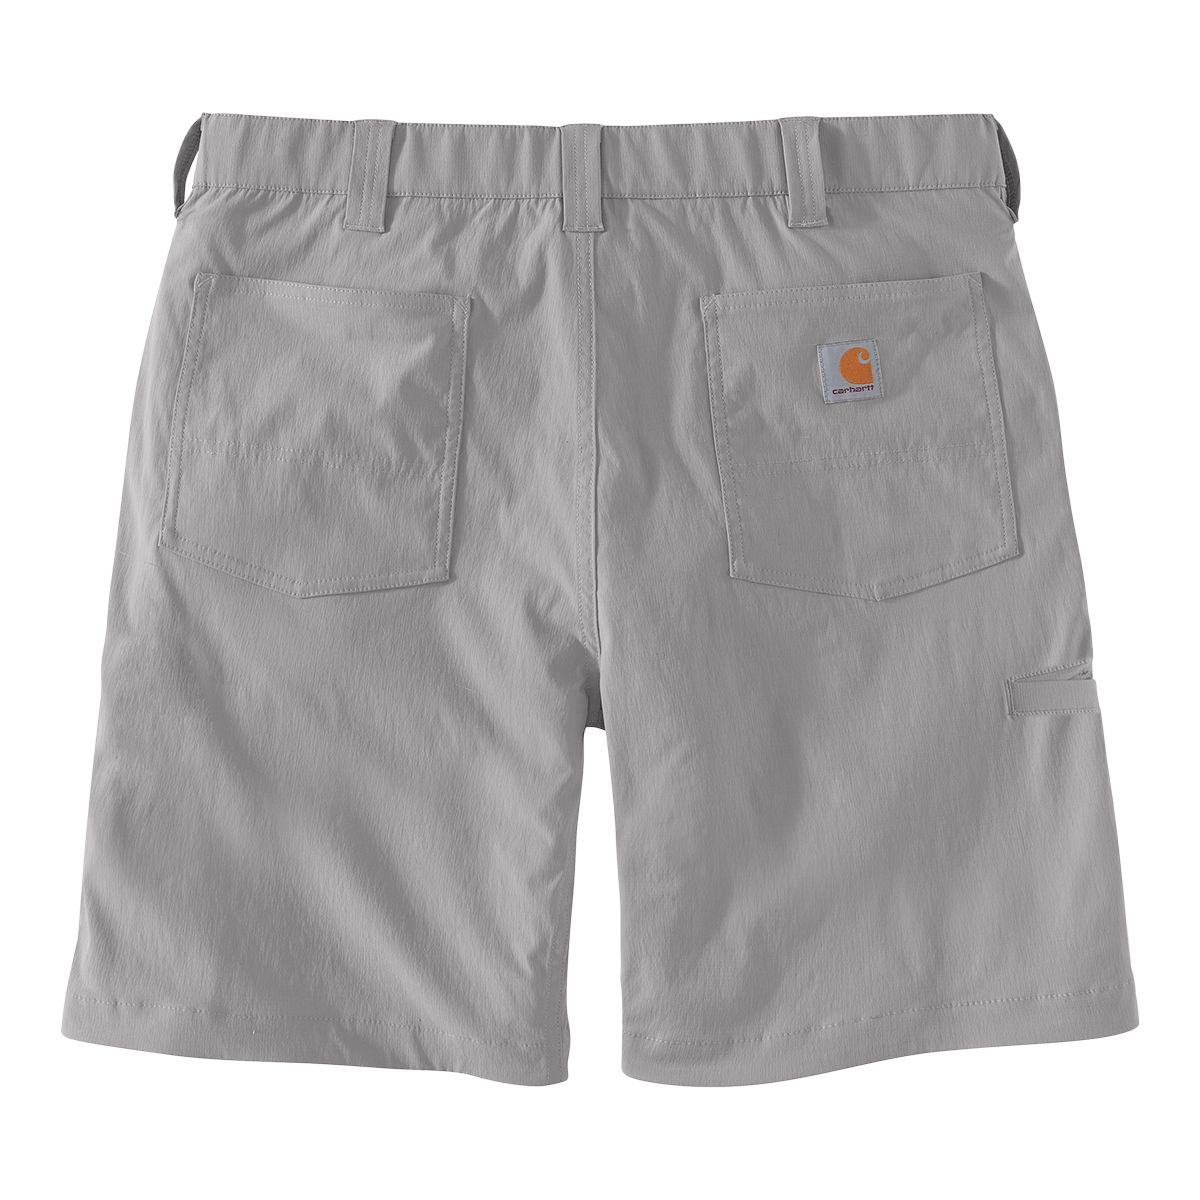 Carhartt Men's Force Lightweight Ripstop 9-in Shorts Relaxed Fit